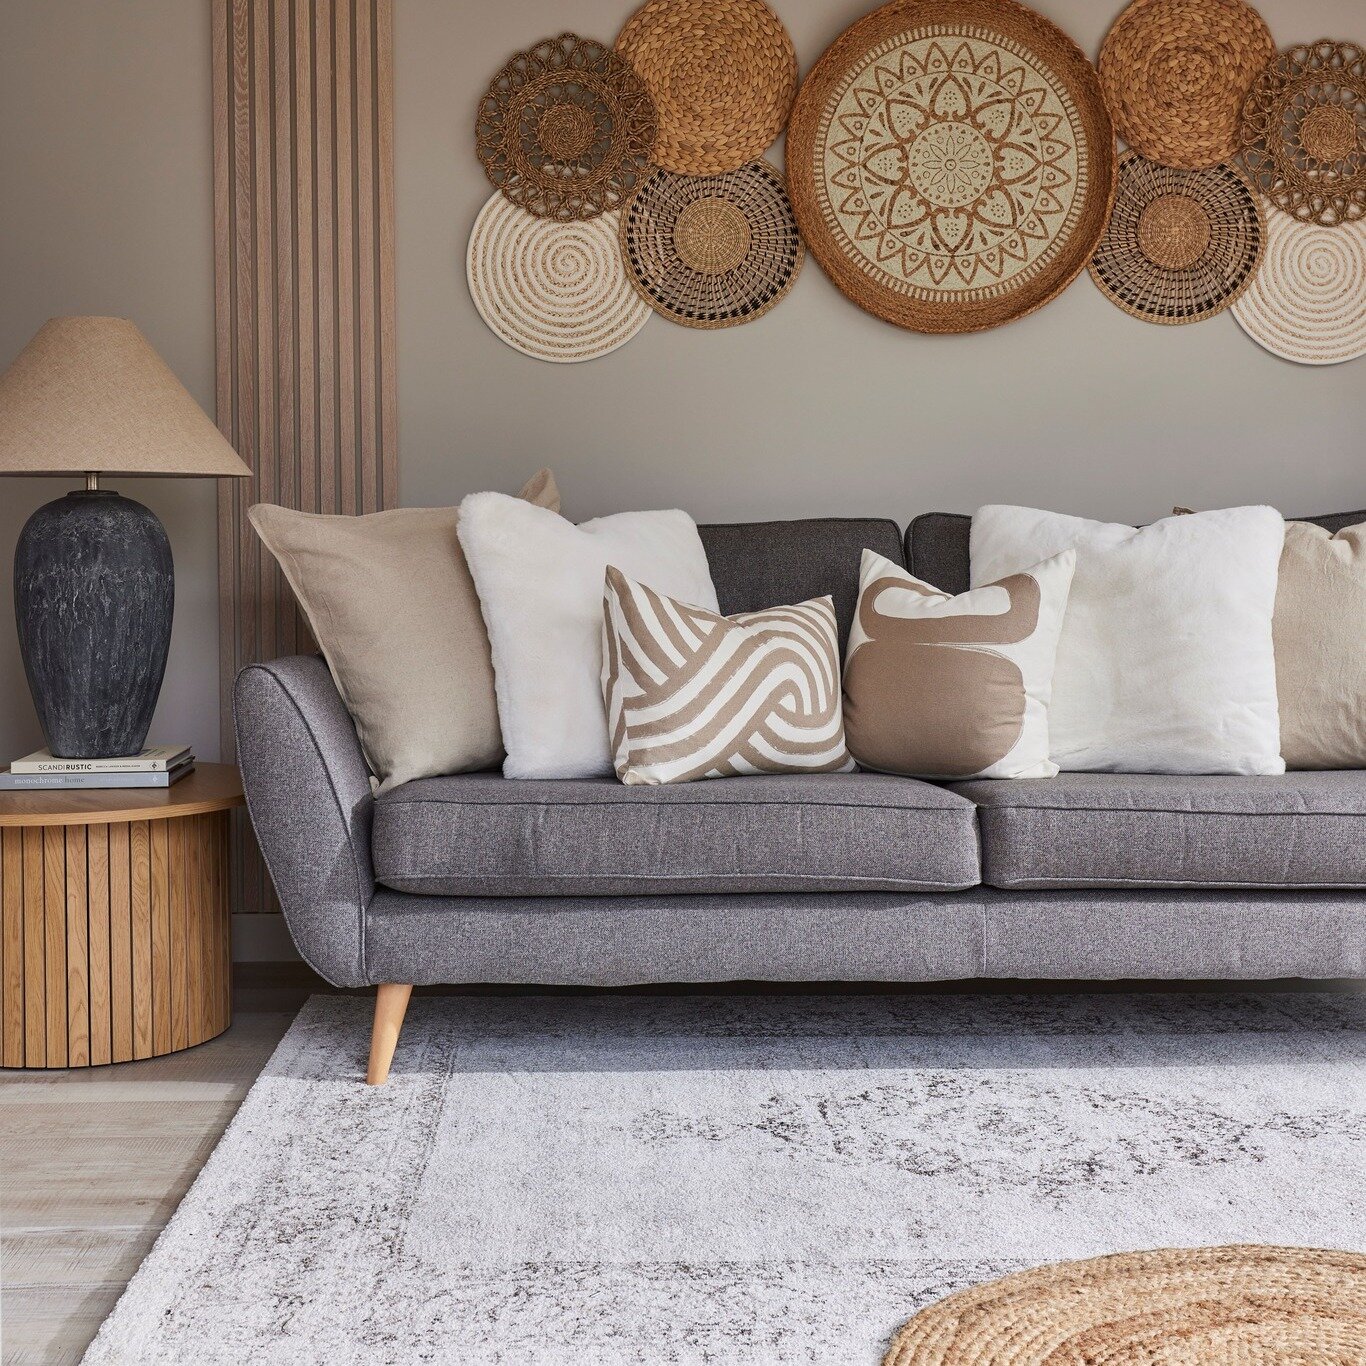 ++NEUTRAL AND TEXTURE++ 

Adding lots of texture and pattern to a neutral scheme is one of my favourite things to do.  Neutral doesn't need to be boring and you create a really calm and relaxing space by layering materials and textures.  This would b